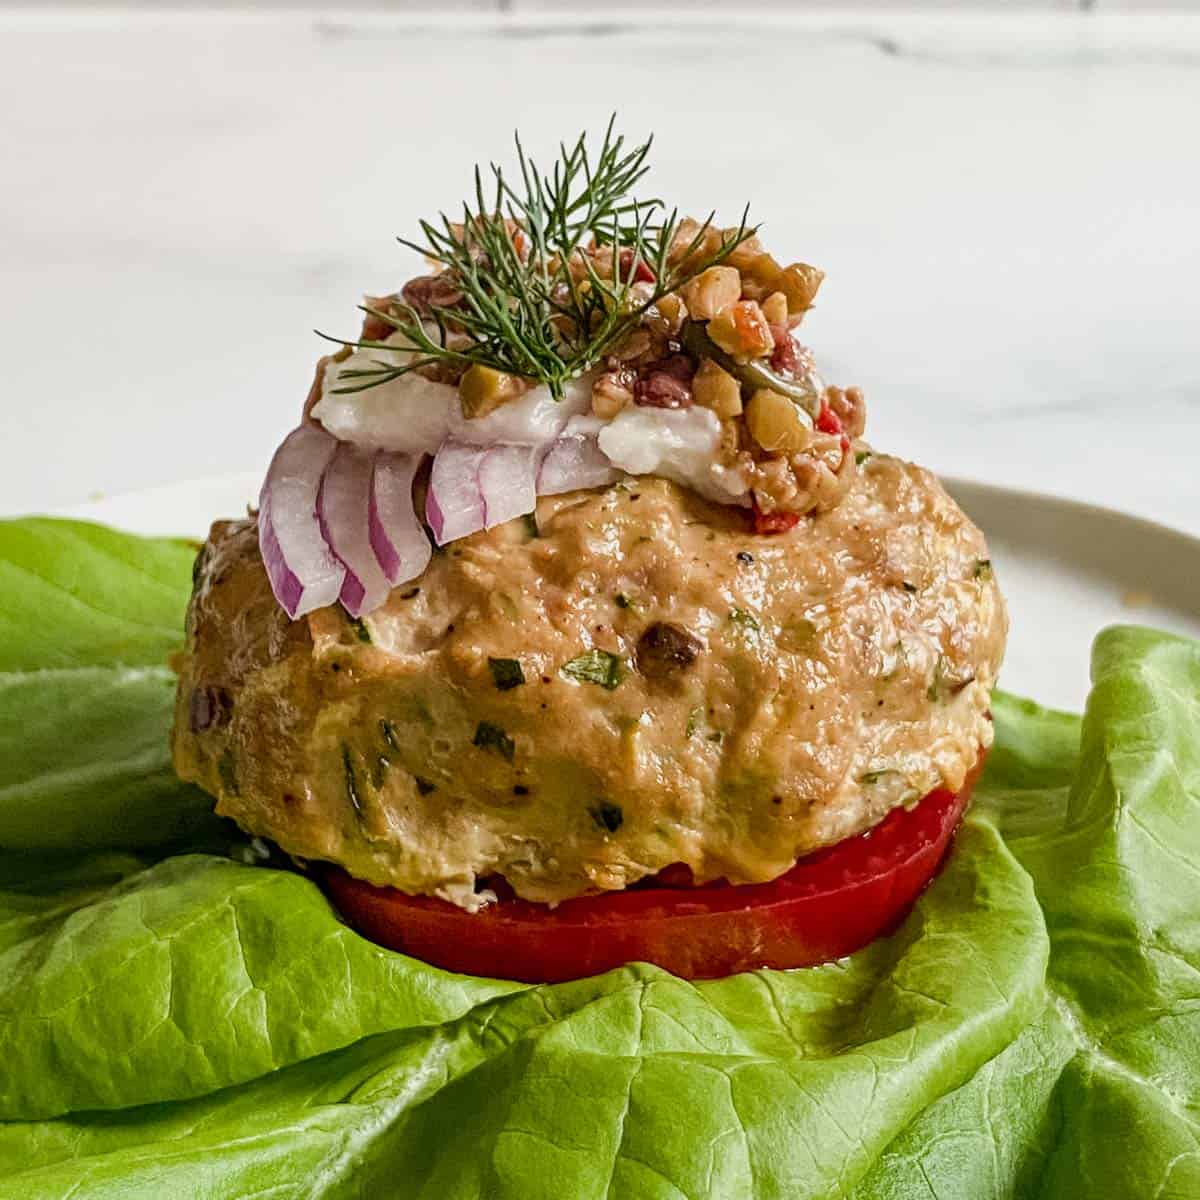 Turkey burger on lettuce wrap with slice of tomato and topped with olive tapenade.